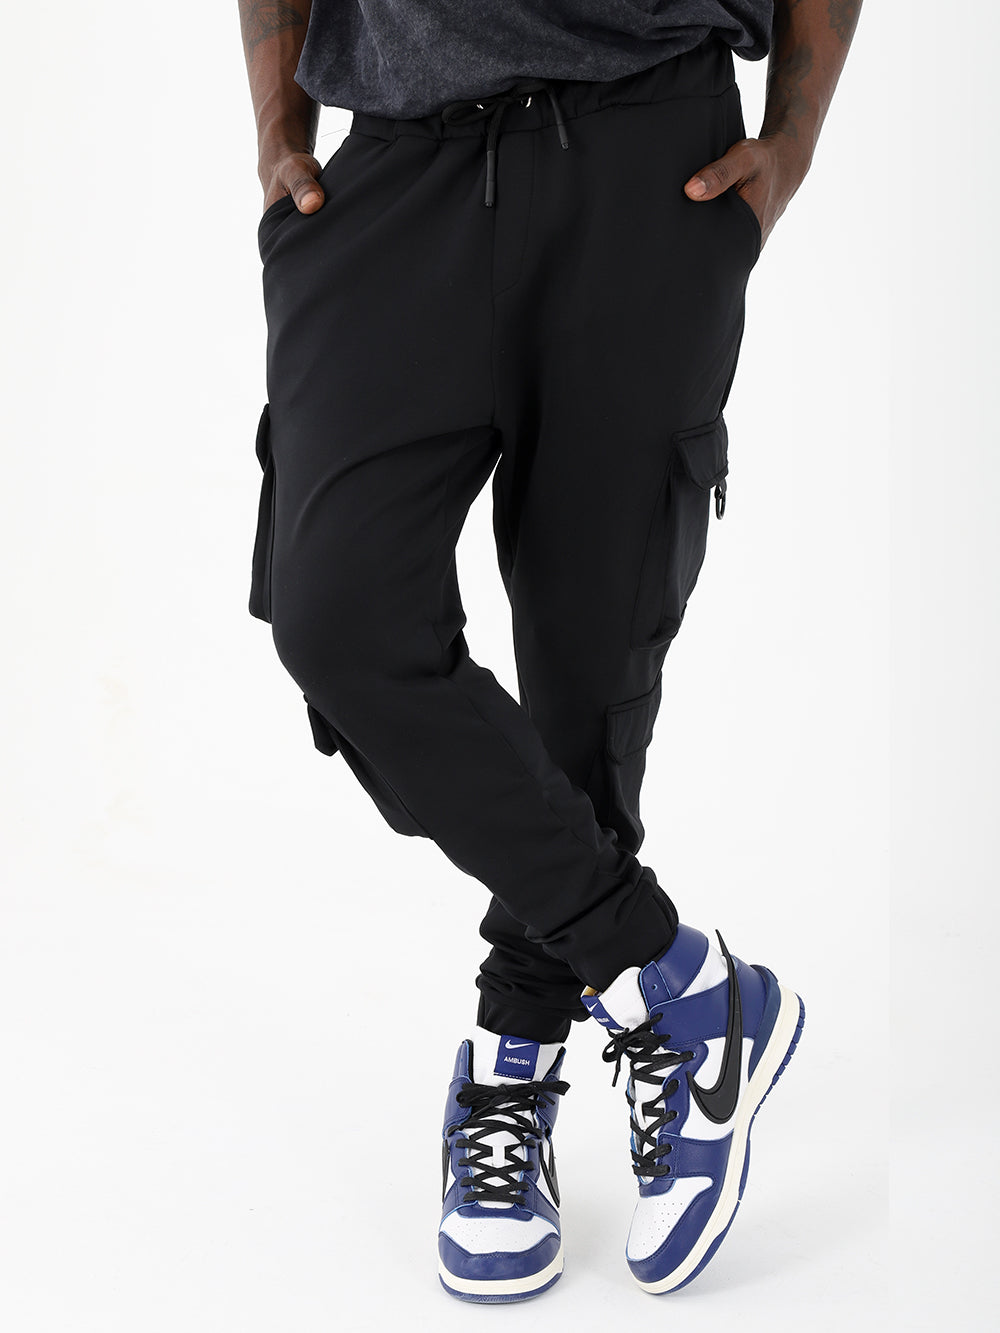 A man in VENTURA JOGGERS with adjustable ankle cuffs posing for a photo.